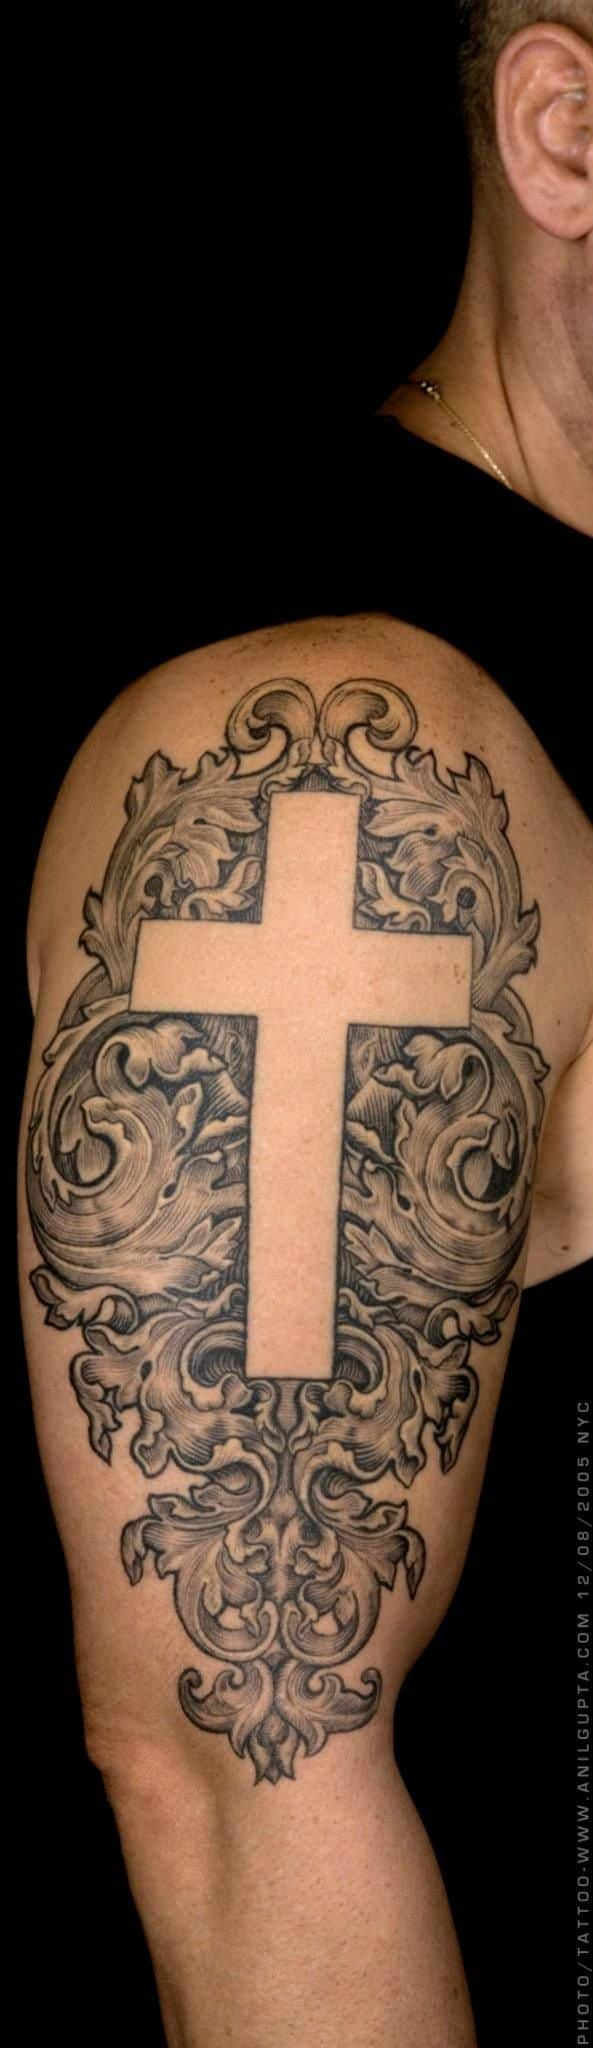 Cross Tattoos For Guys Tattoo Ideas And Designs For Men regarding size 593 X 2048